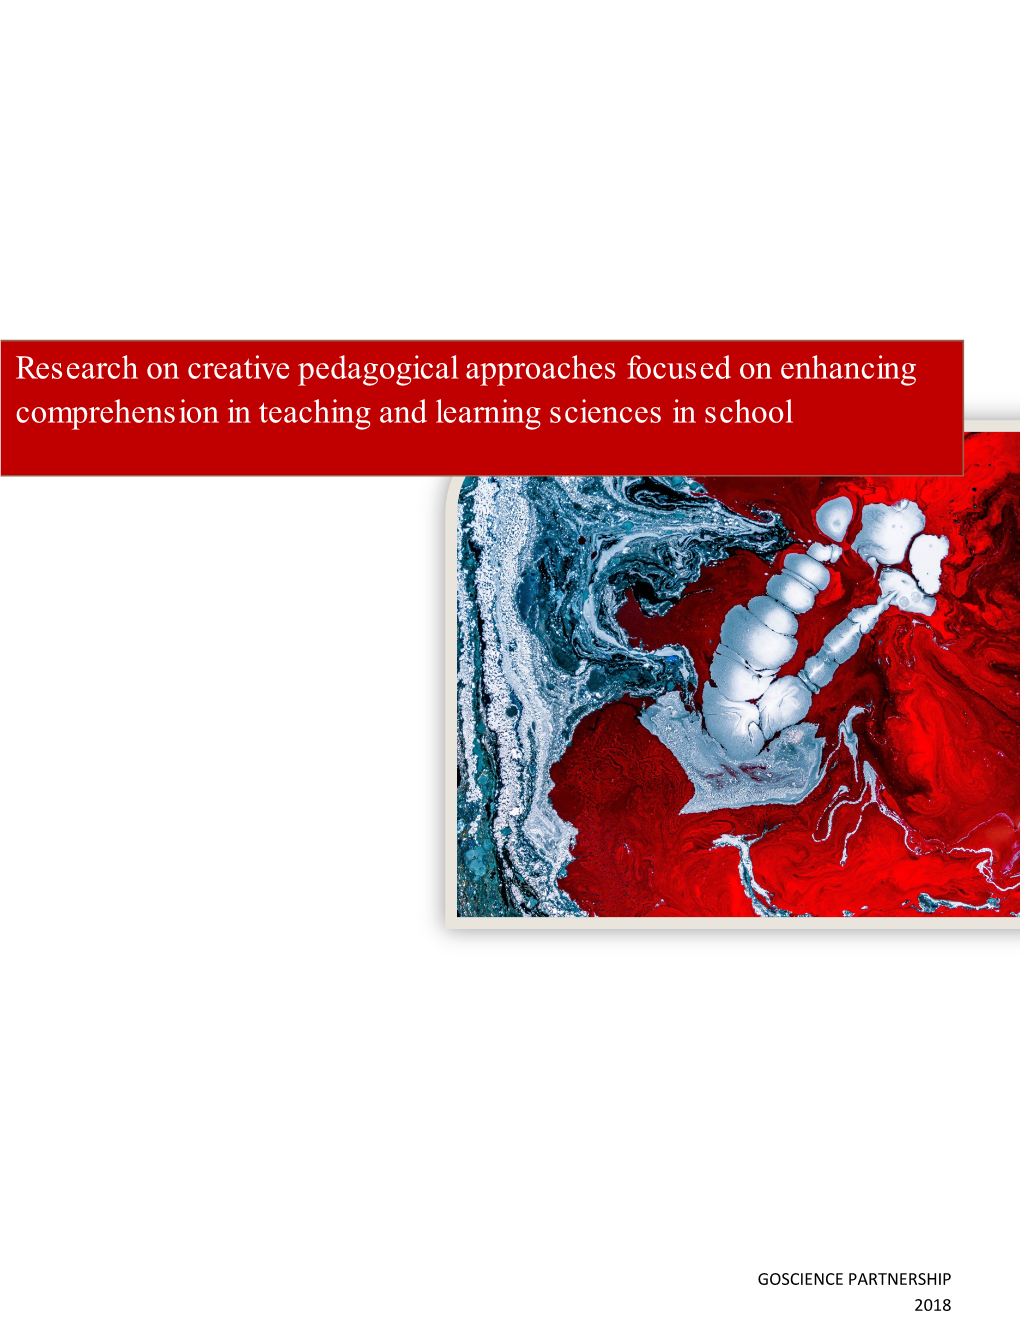 Research on Creative Pedagogical Approaches Focused on Enhancing Comprehension in Teaching and Learning Sciences in School